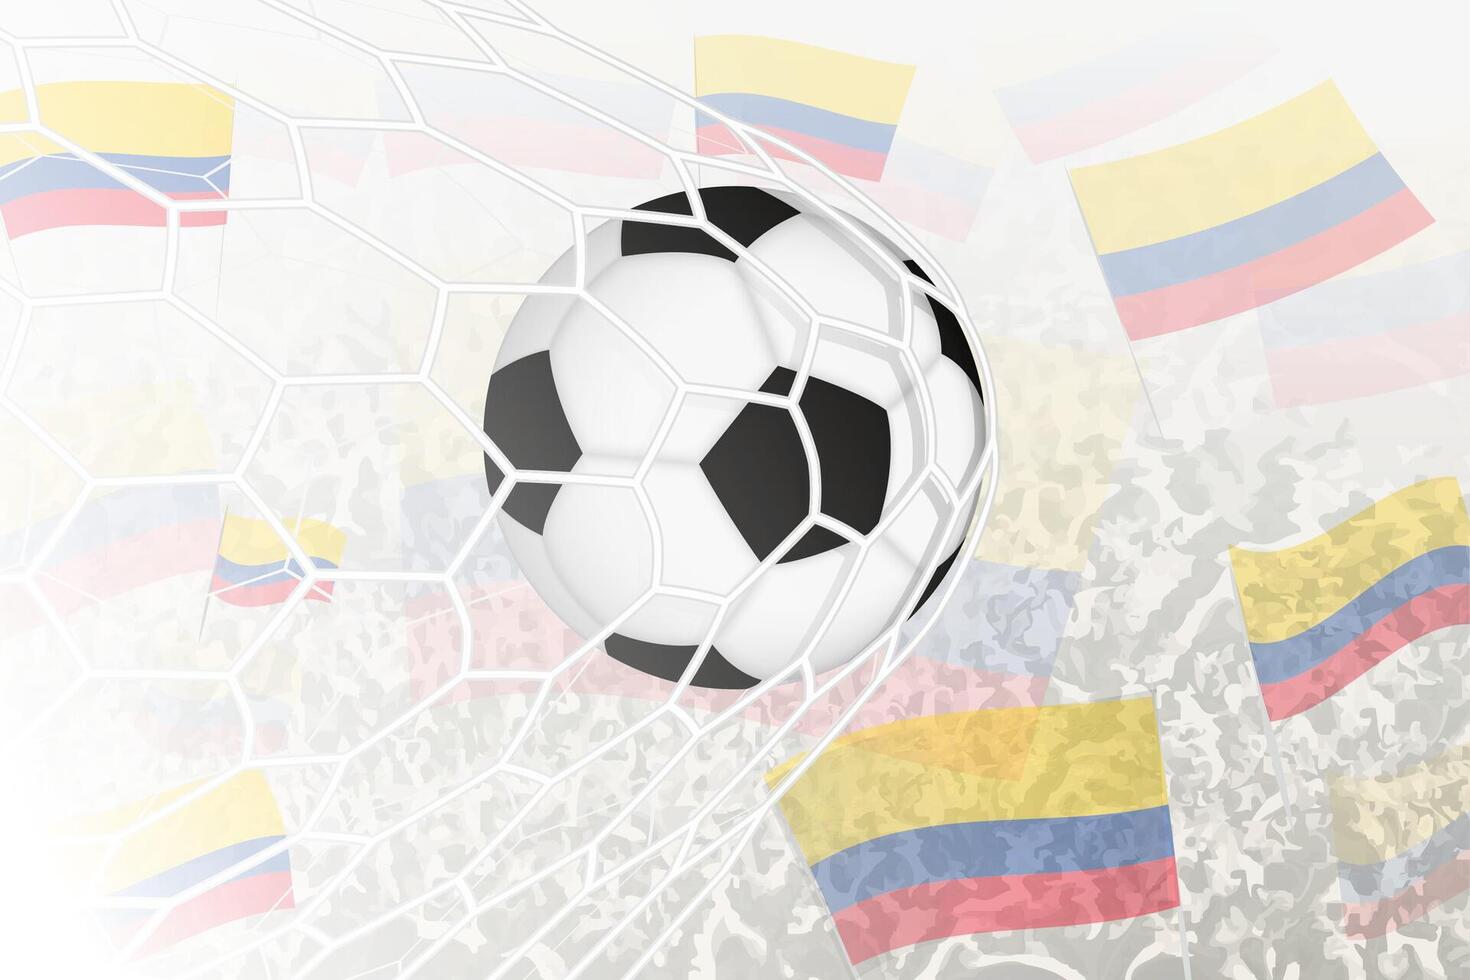 National Football team of Colombia scored goal. Ball in goal net, while football supporters are waving the Colombia flag in the background. vector